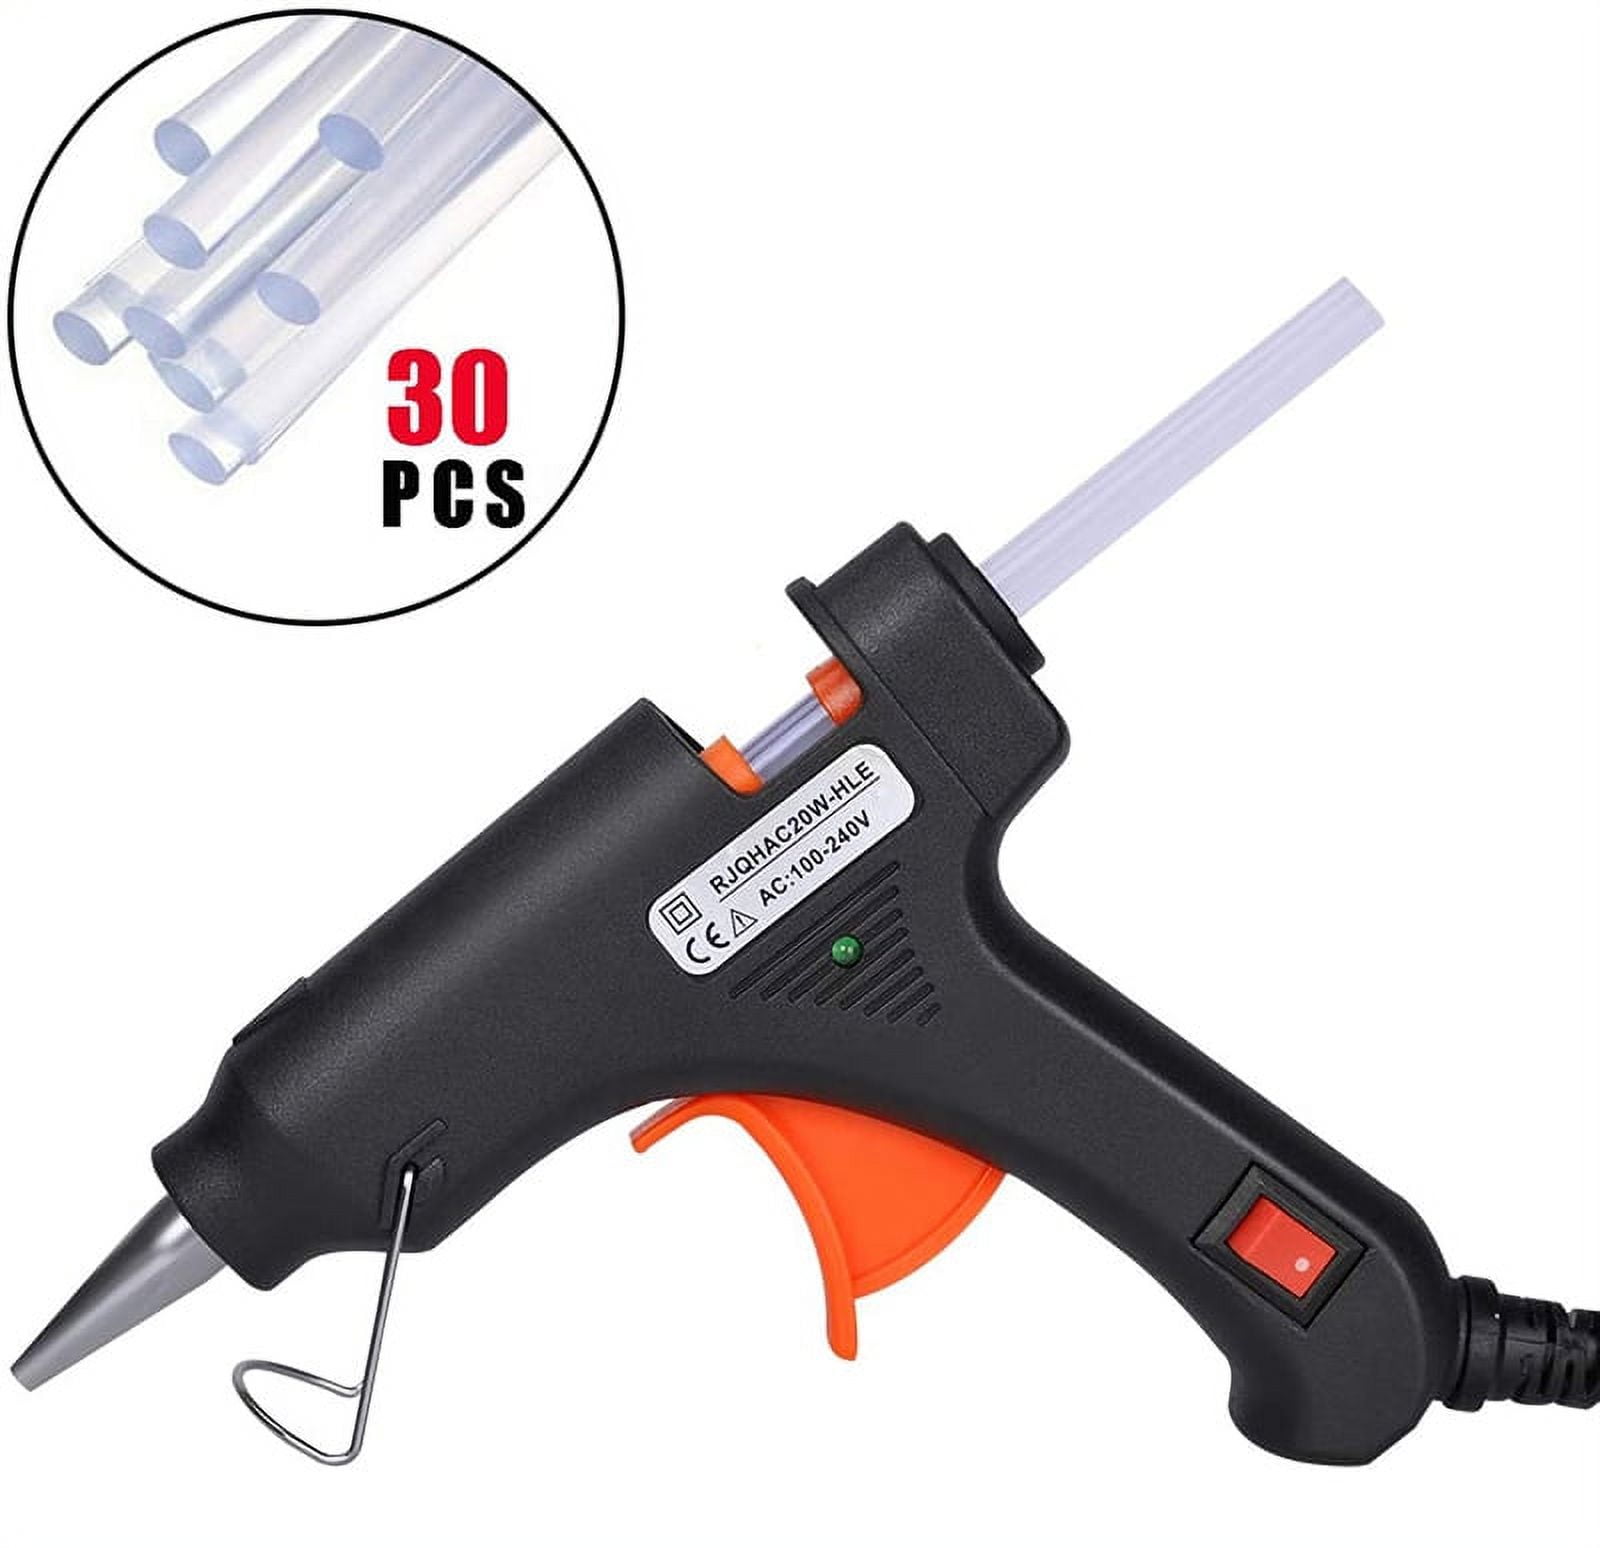 230V 12(70)W DIY Mini Hot Glue Gun Silicone Melt Repair Tools with 7mm  Sticks For Diyer CE Approved - Price history & Review, AliExpress Seller -  TASP Tools Store